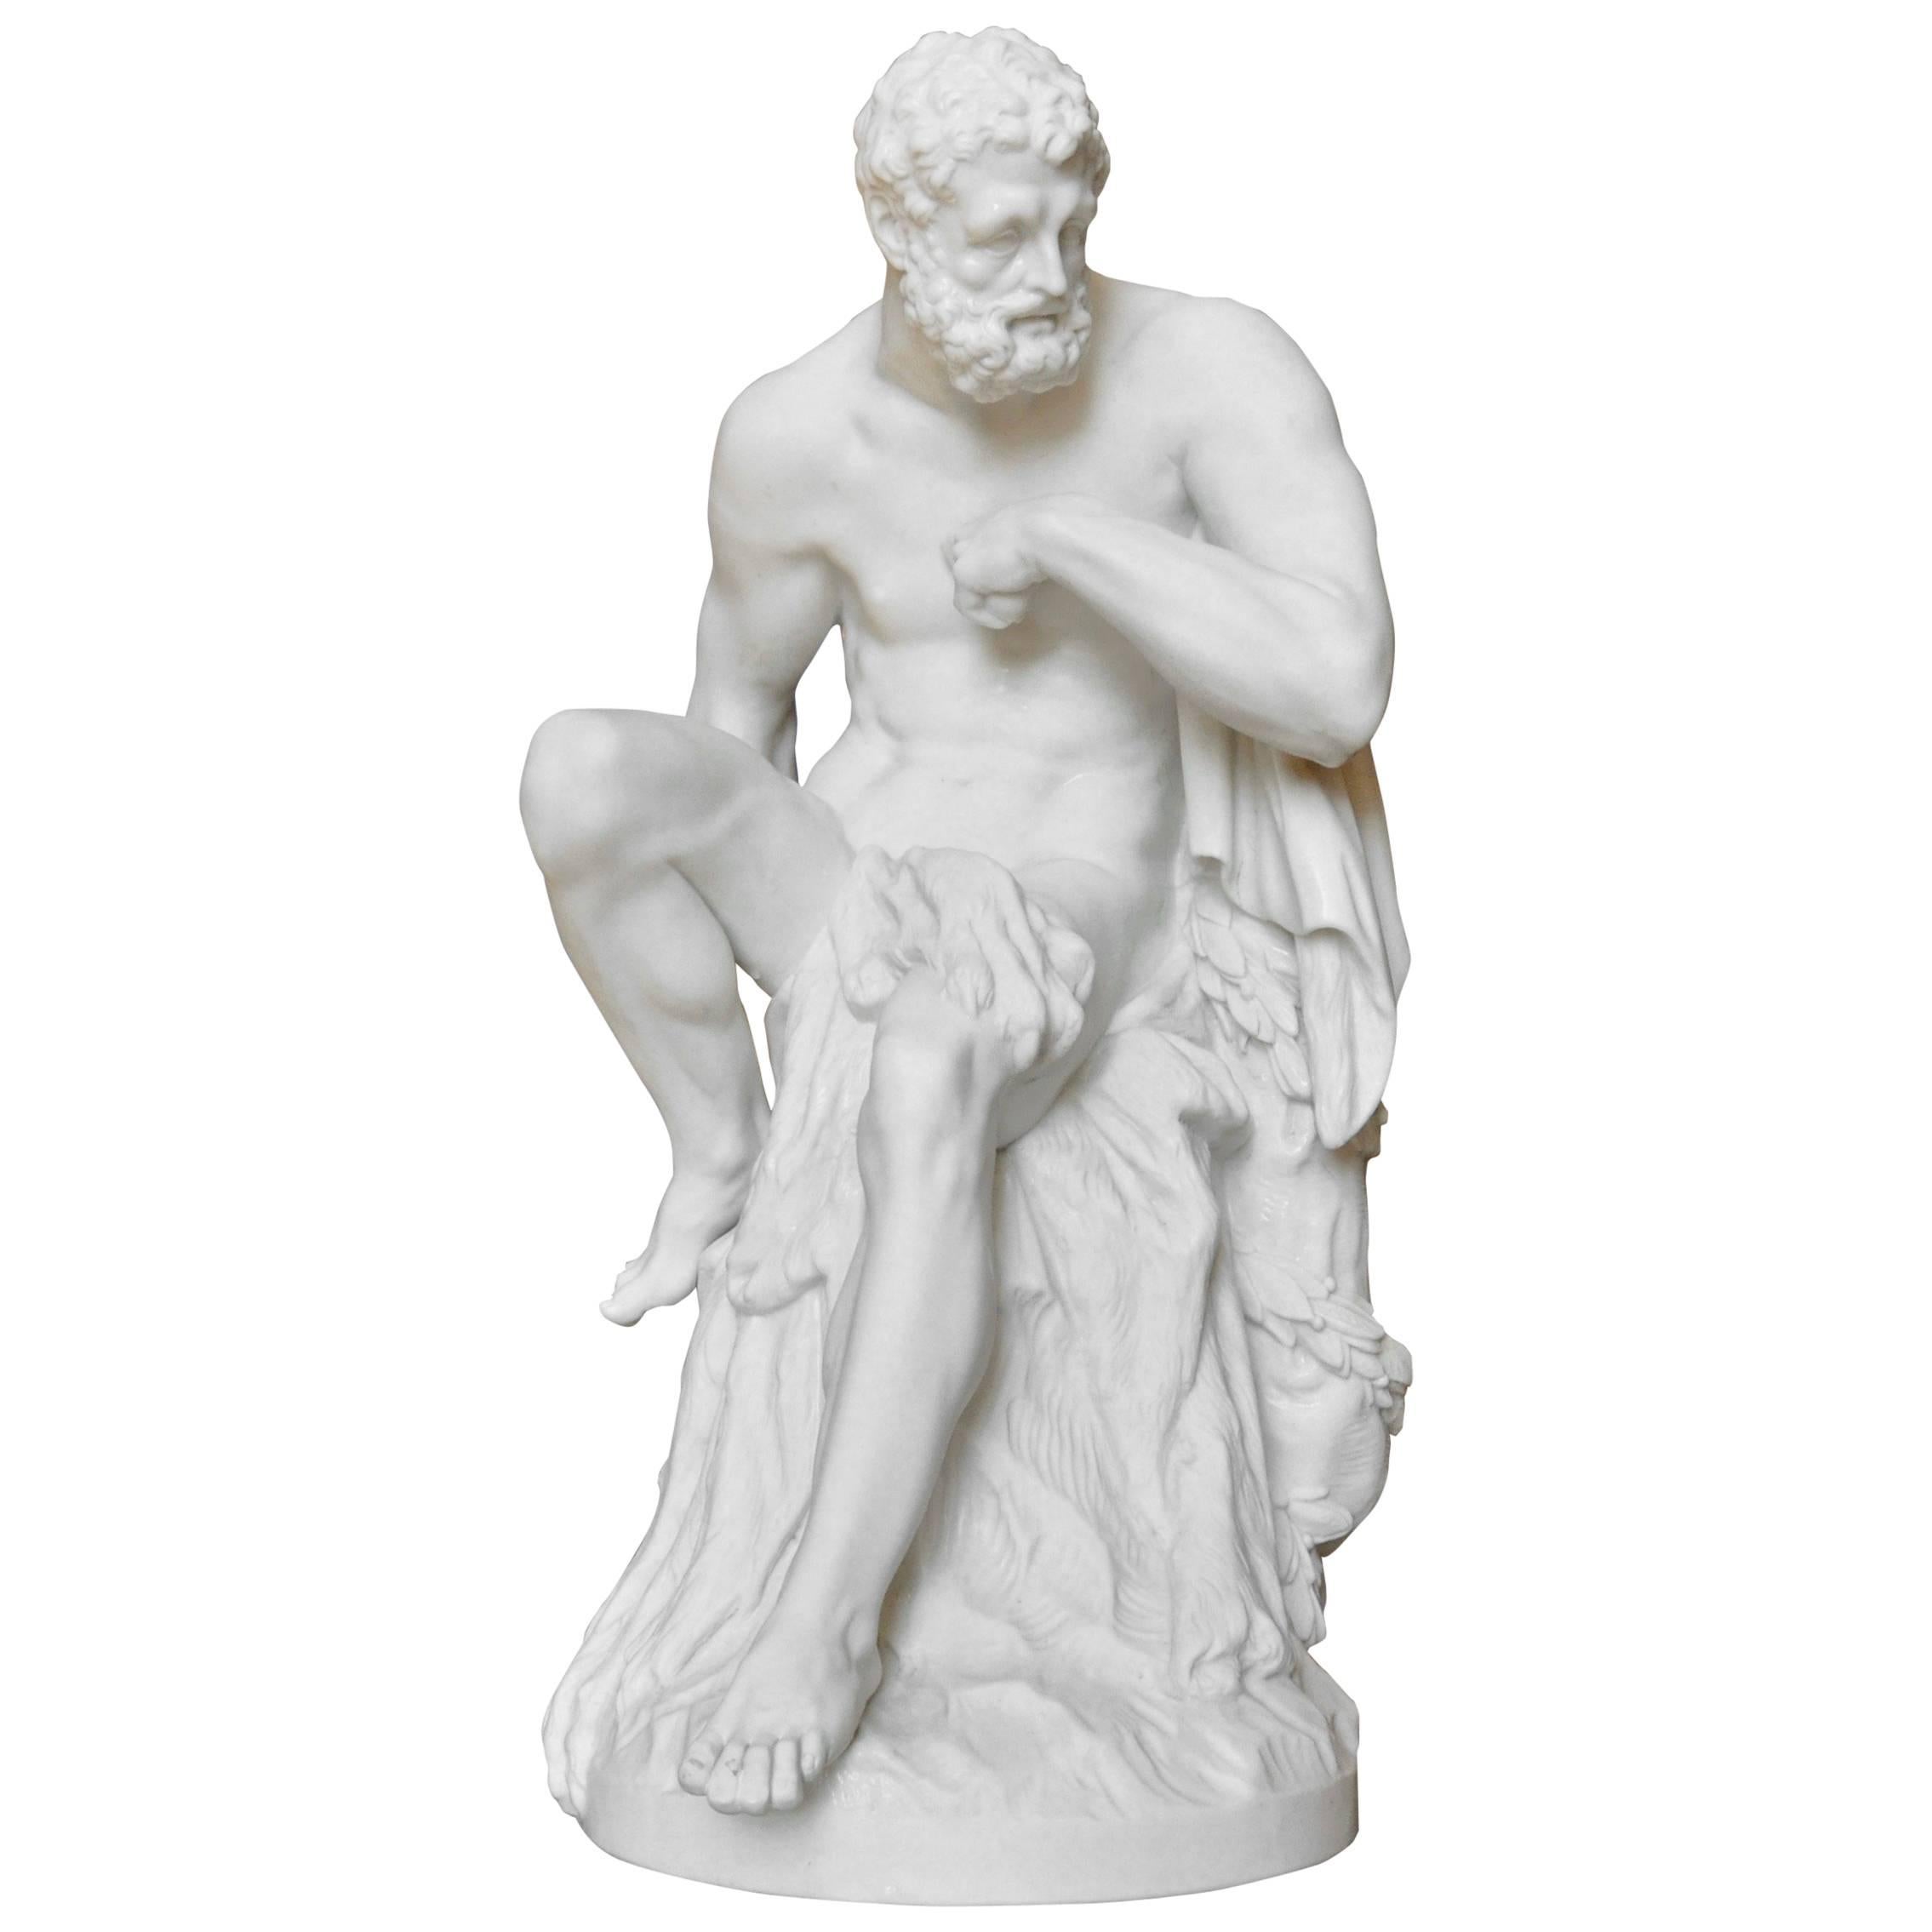 Large 19th Century Berlin Bisque or Parian Porcelain Figure of Hercules